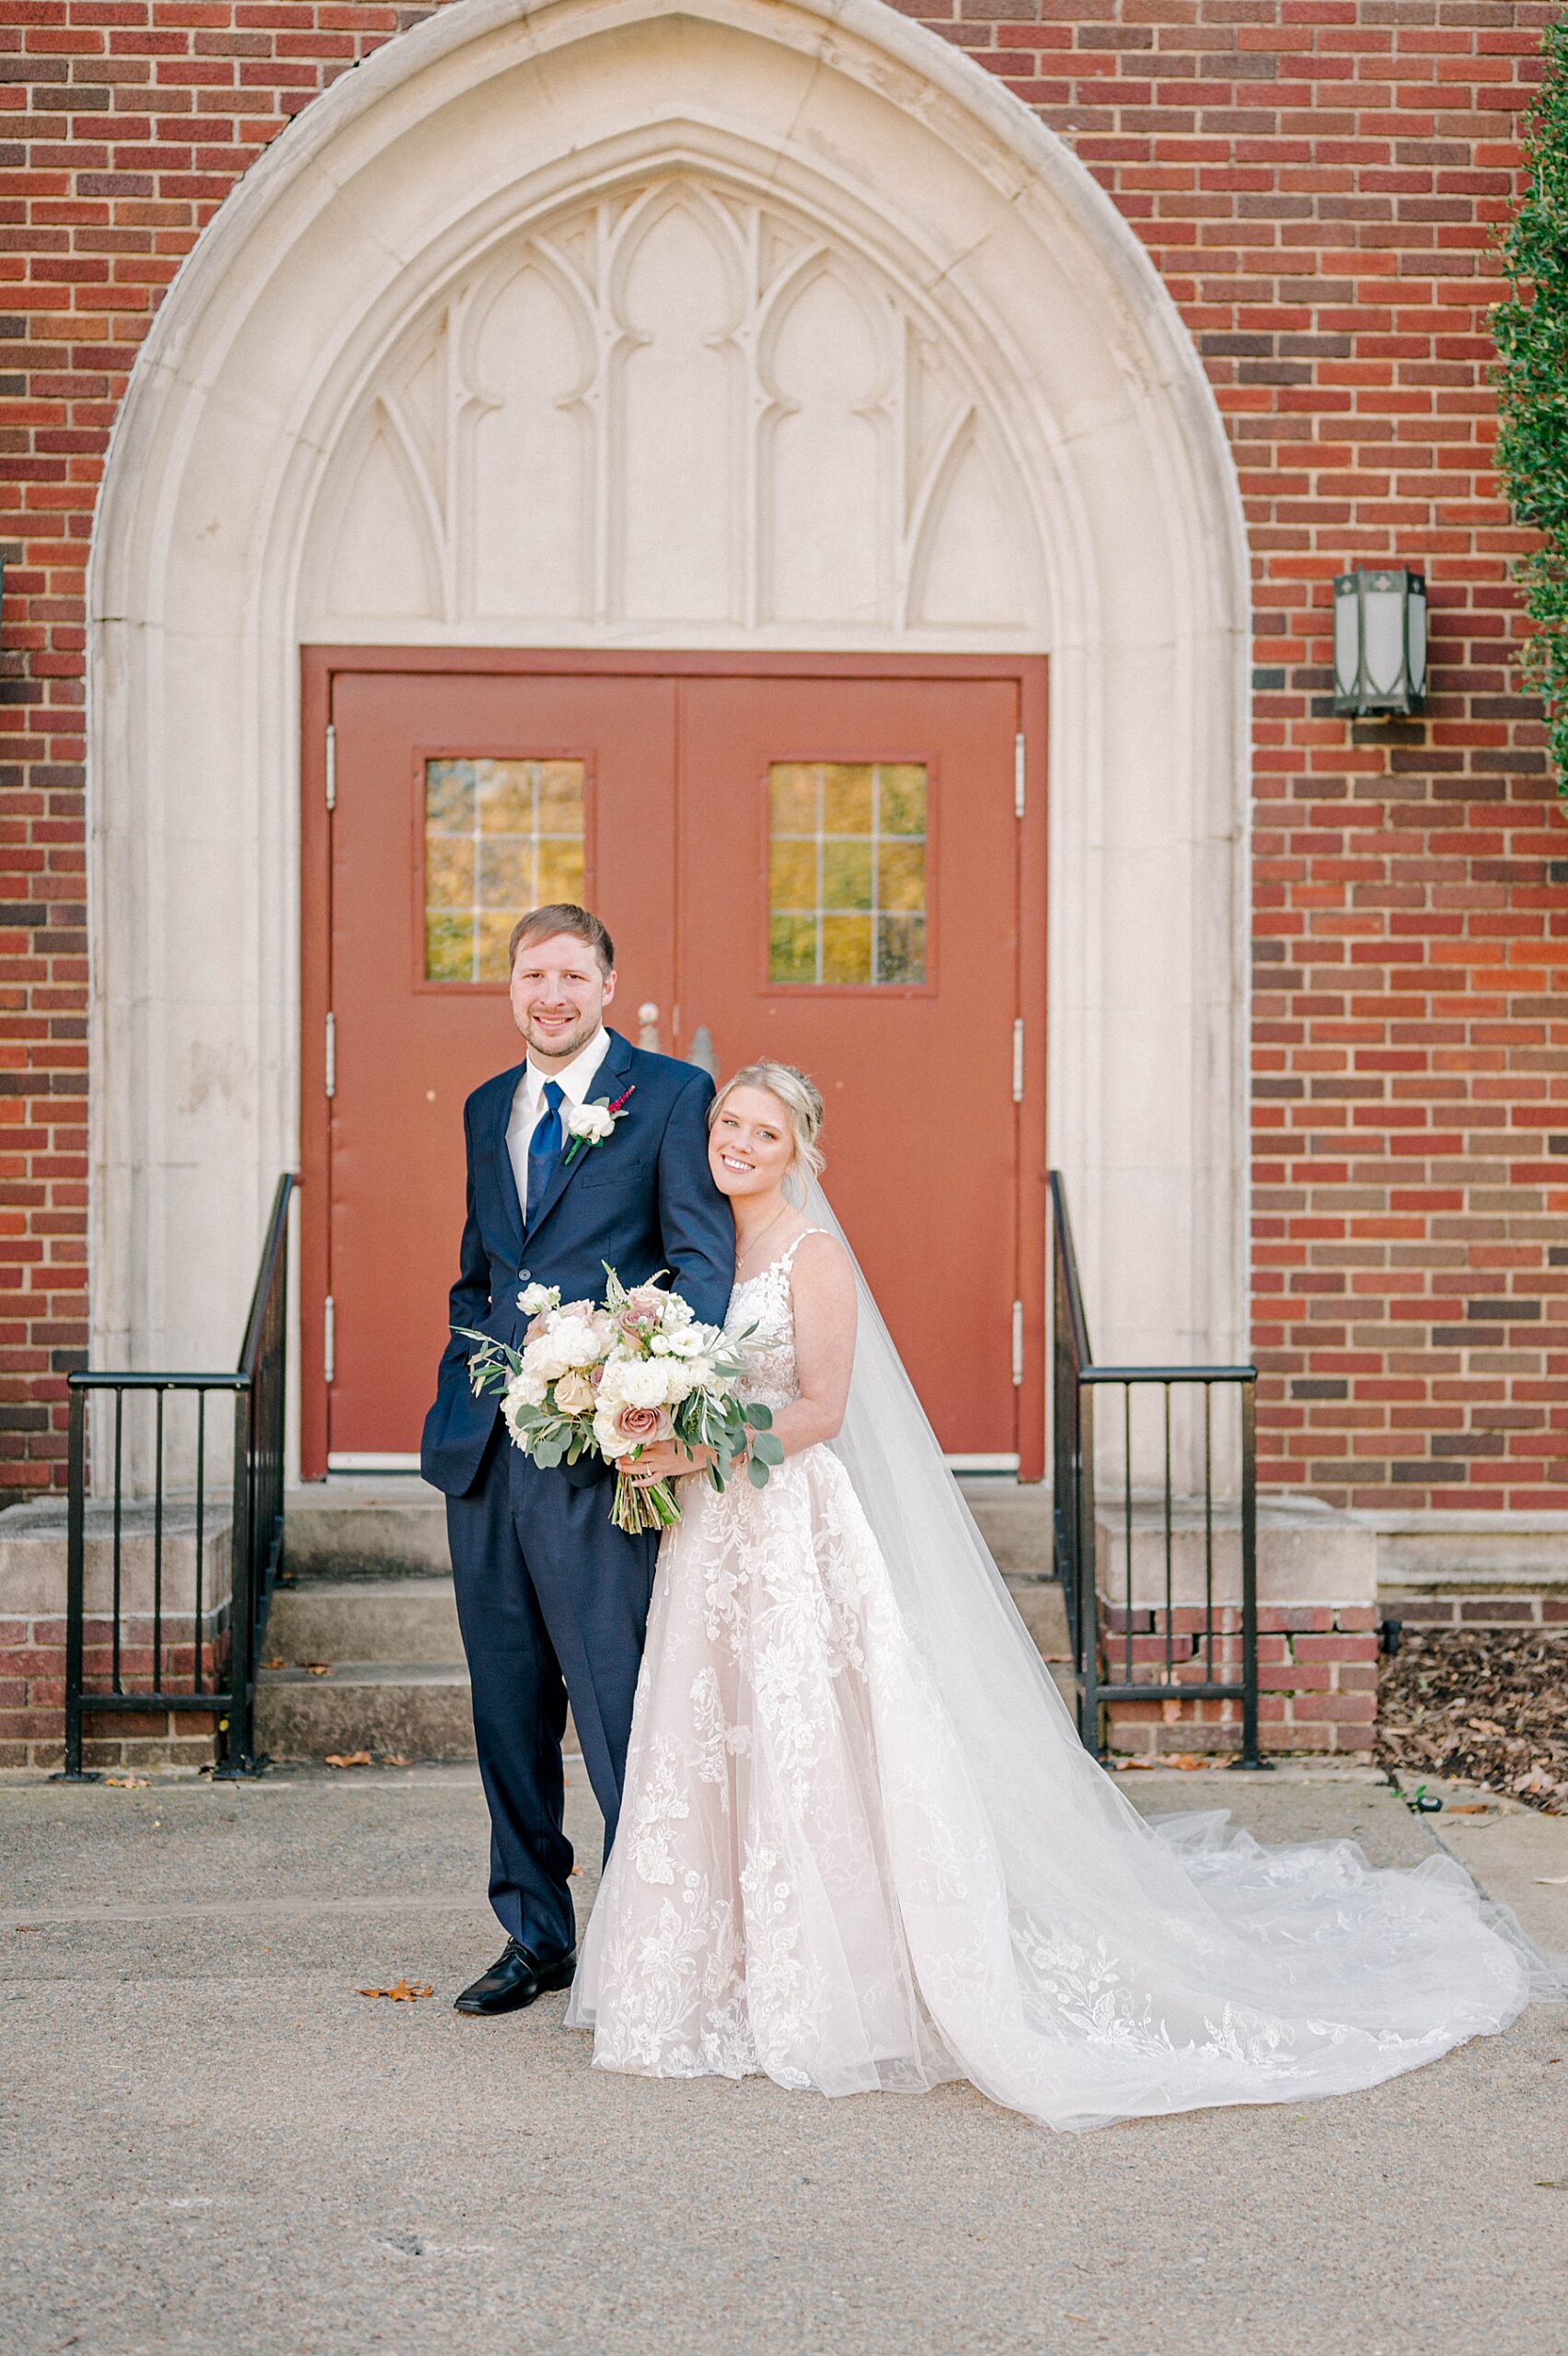 Bride and groom smiling in front of church